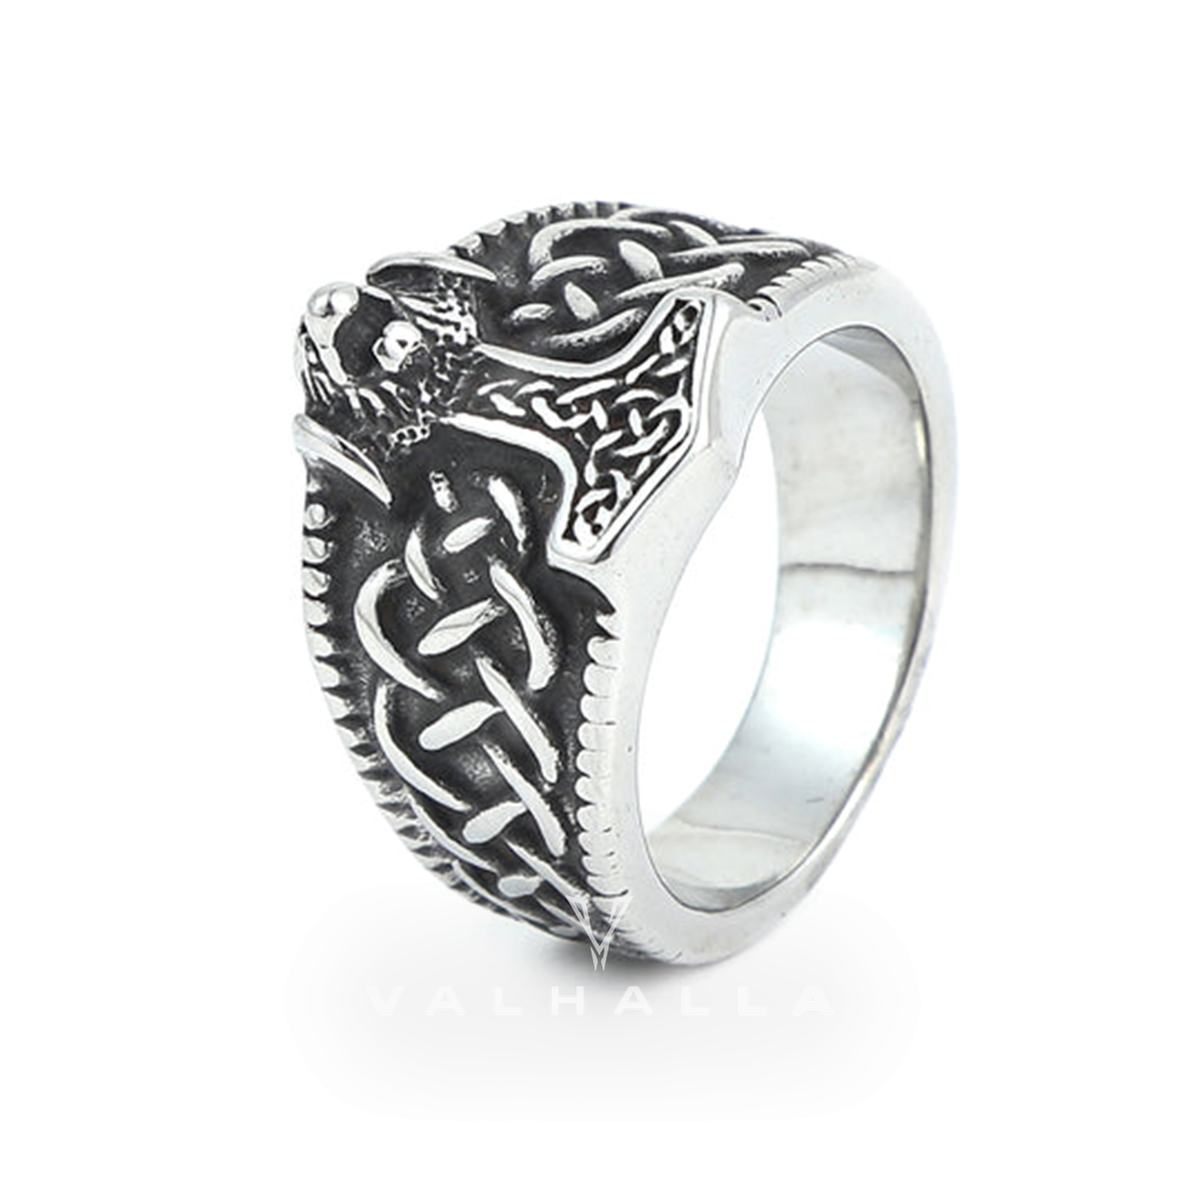 Handcrafted Stainless Steel Thor's Hammer and Celtic Knotwork Ring